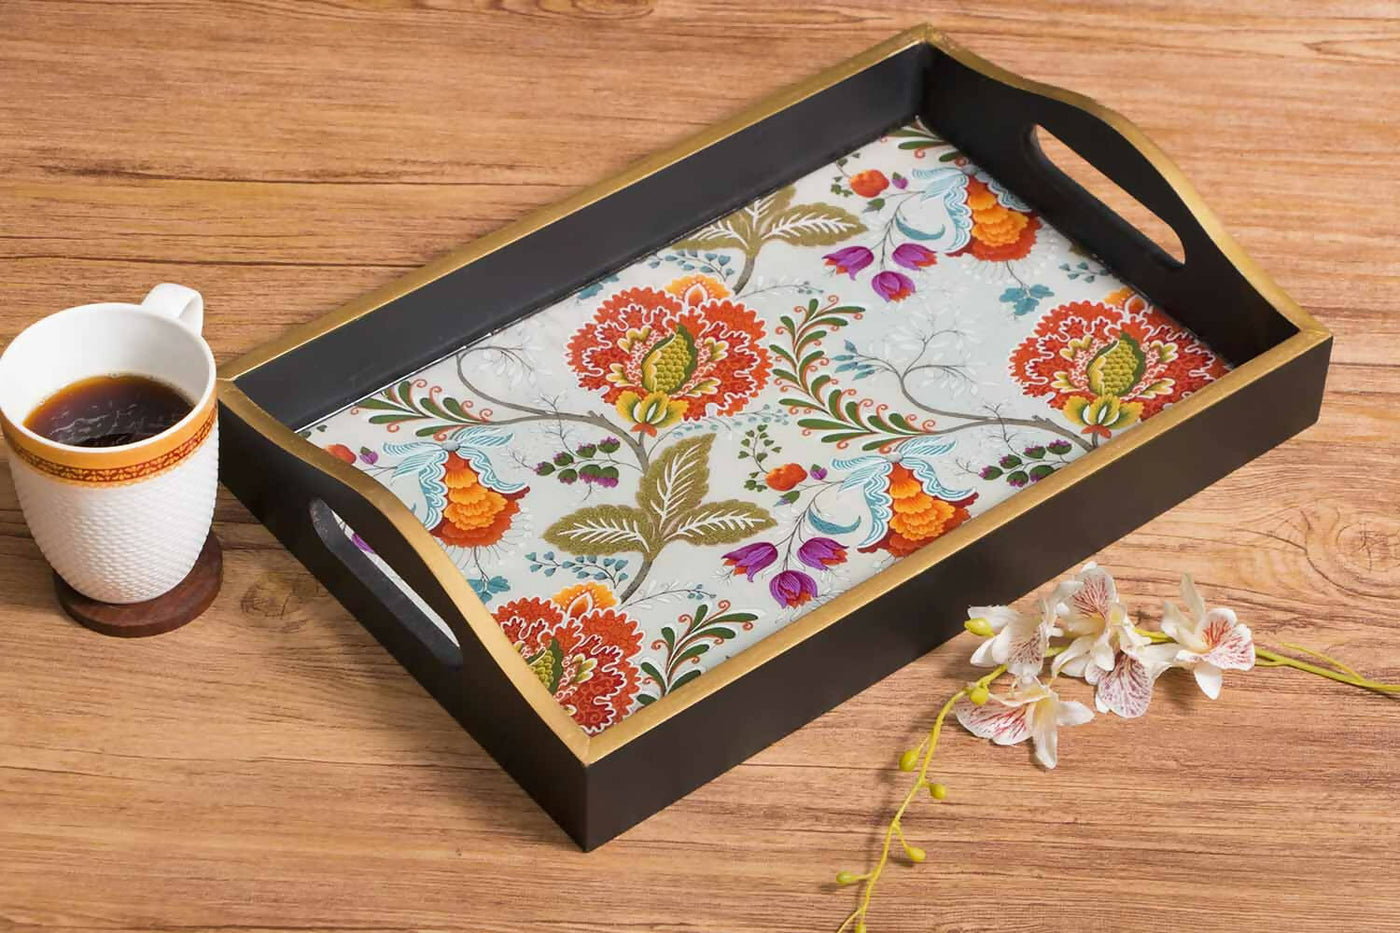 Handcrafted Serving Tray In Spanish Floral Print - Small - Dining & Kitchen - 1